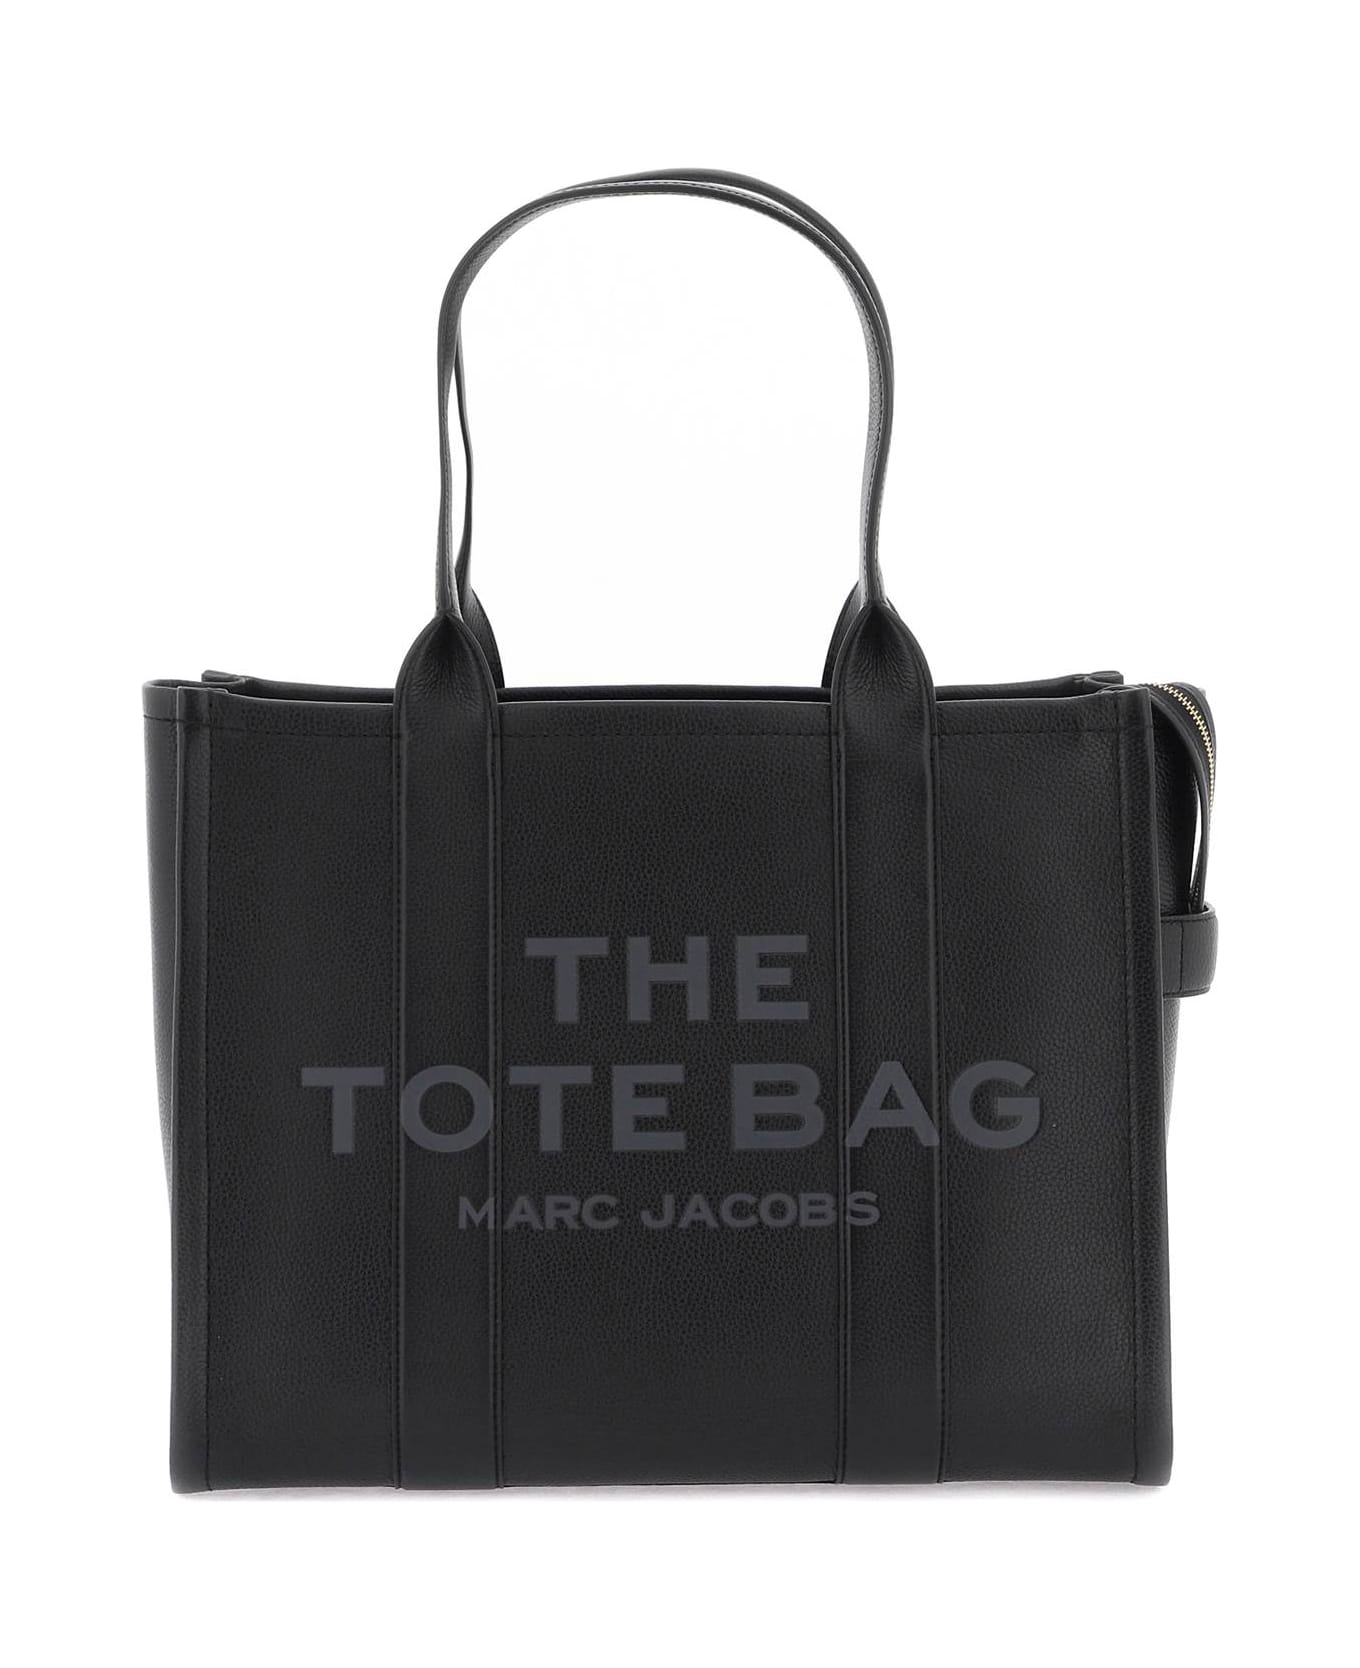 Marc Jacobs The Leather Large Tote Bag - BLACK (Black) トートバッグ